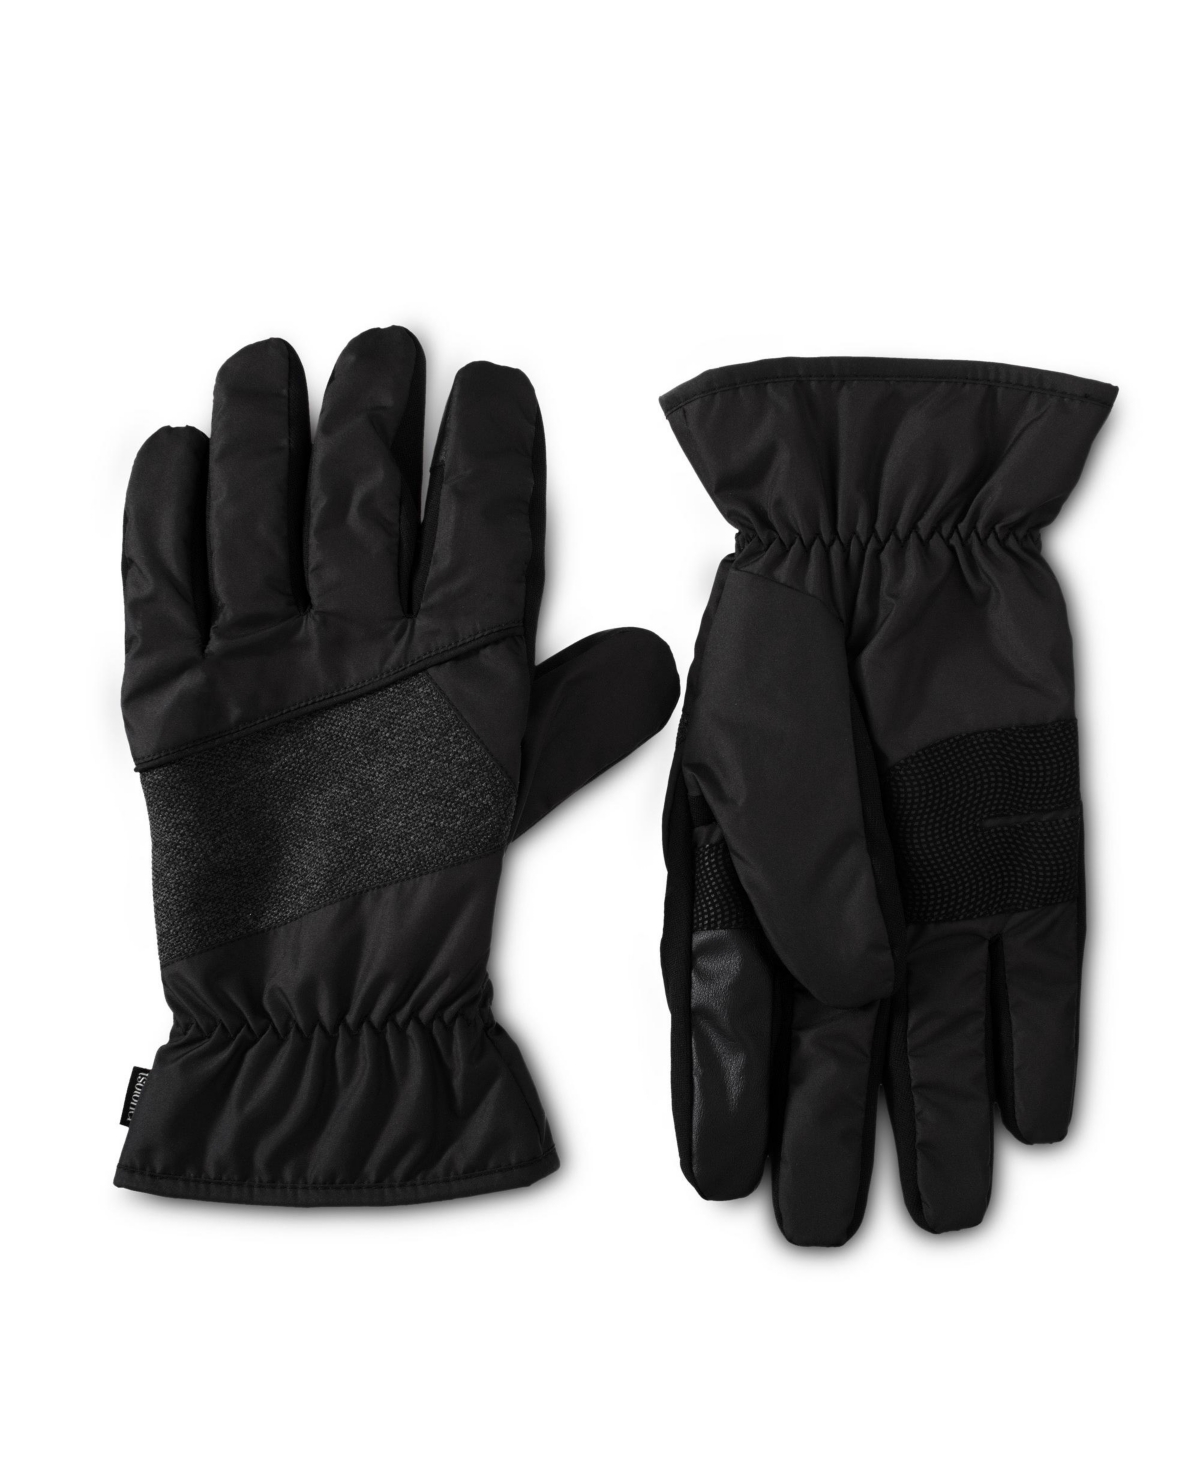 Men's Insulated Water Repellent Tech Stretch Piecing Gloves with Touchscreen Technology - Solid Black